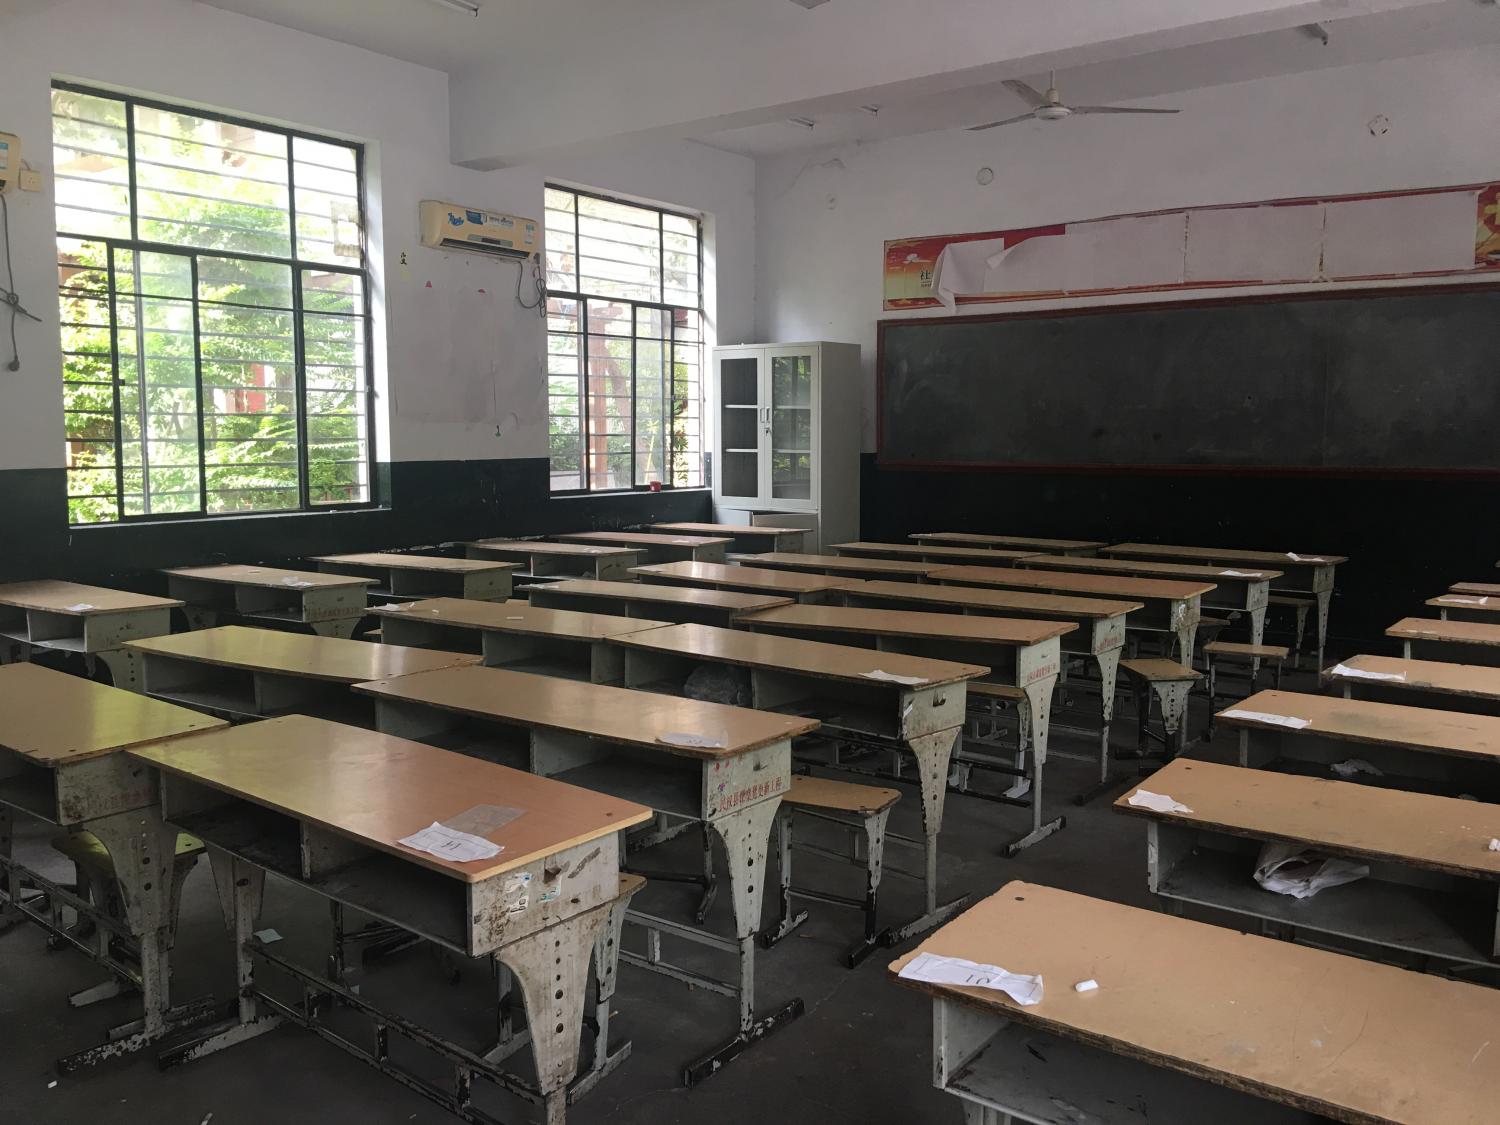 Rows of desks line a classroom in the best primary school in the county where Min conducted interviews. 